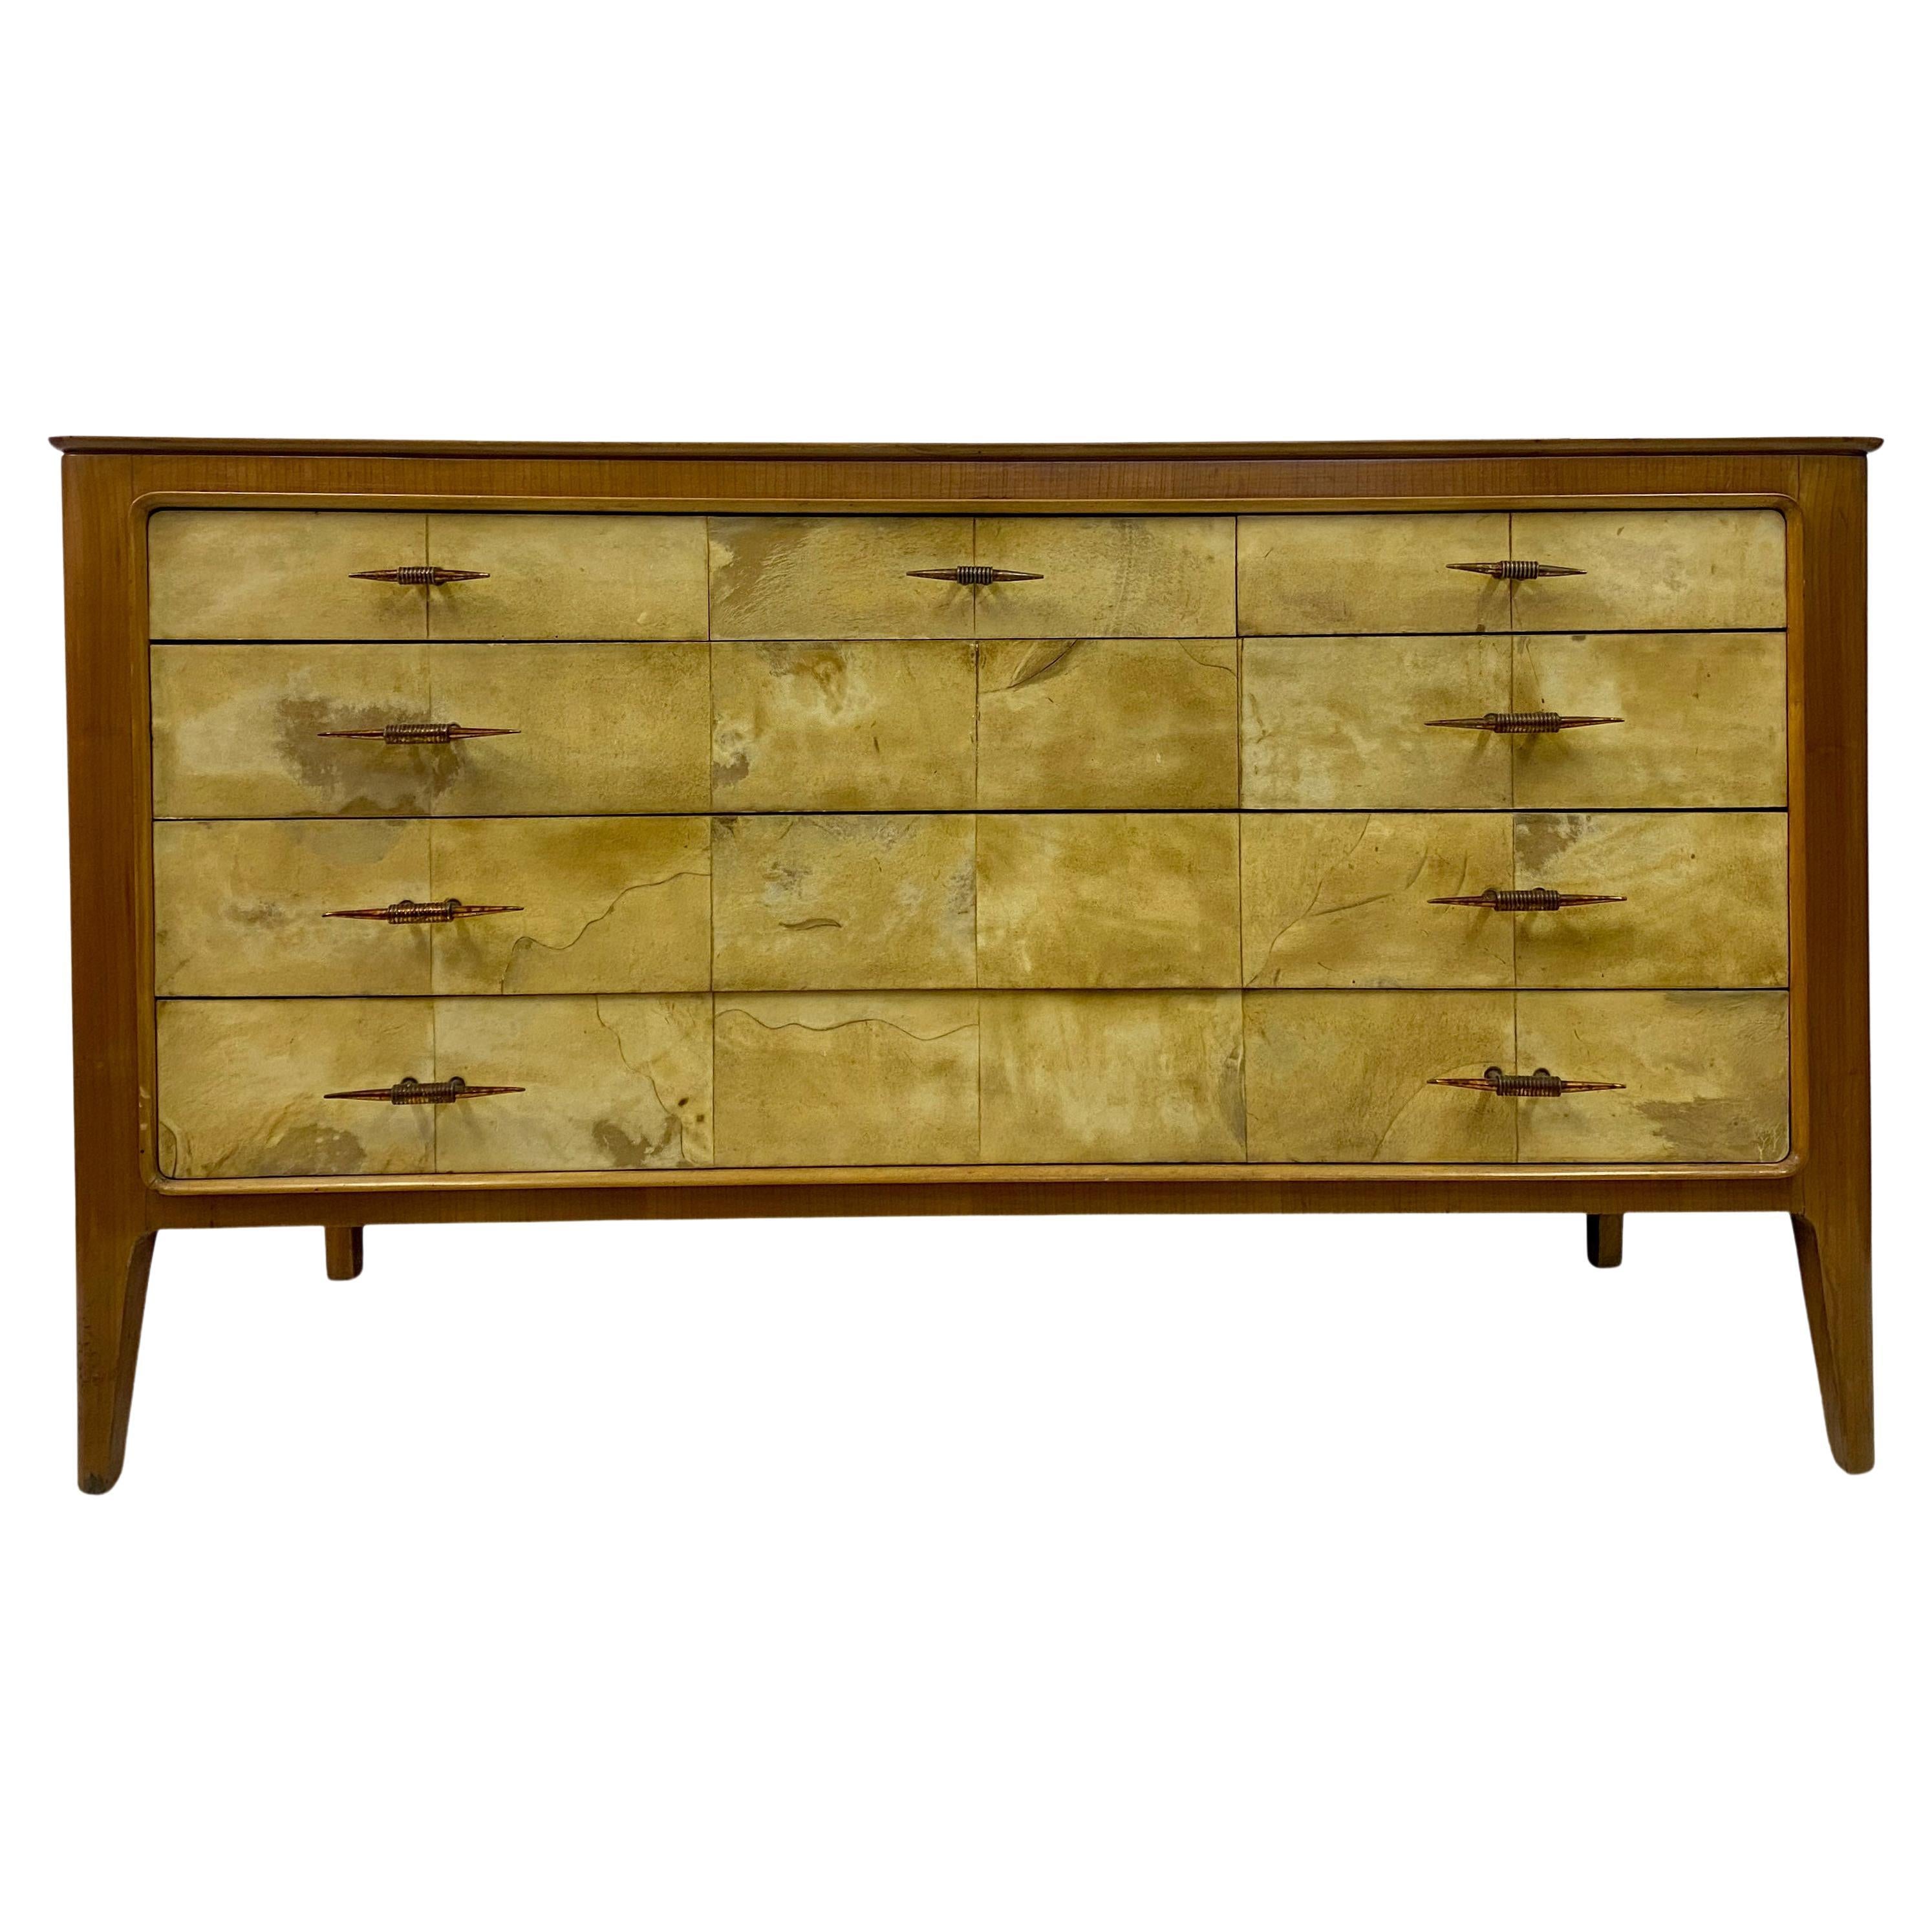 1950s, Italian Parchment and Cherry Wood Chest of Drawers